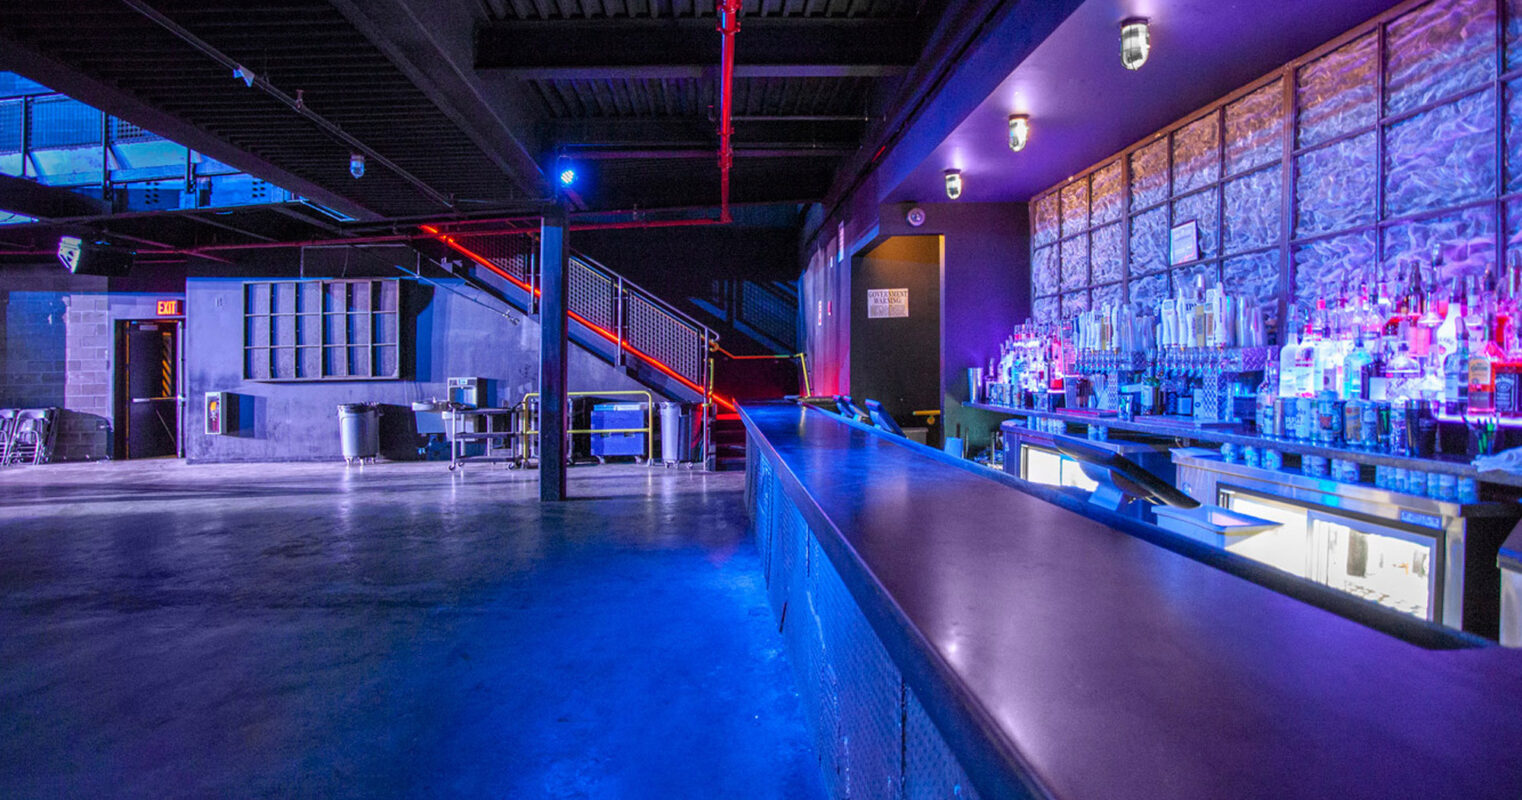 Spacious nightclub interior with vibrant blue lighting accentuating the transparent liquor display. A sleek, black-topped bar runs parallel to an open dance floor, and red pipes overhead add a burst of contrasting color to the industrial-chic ambiance.